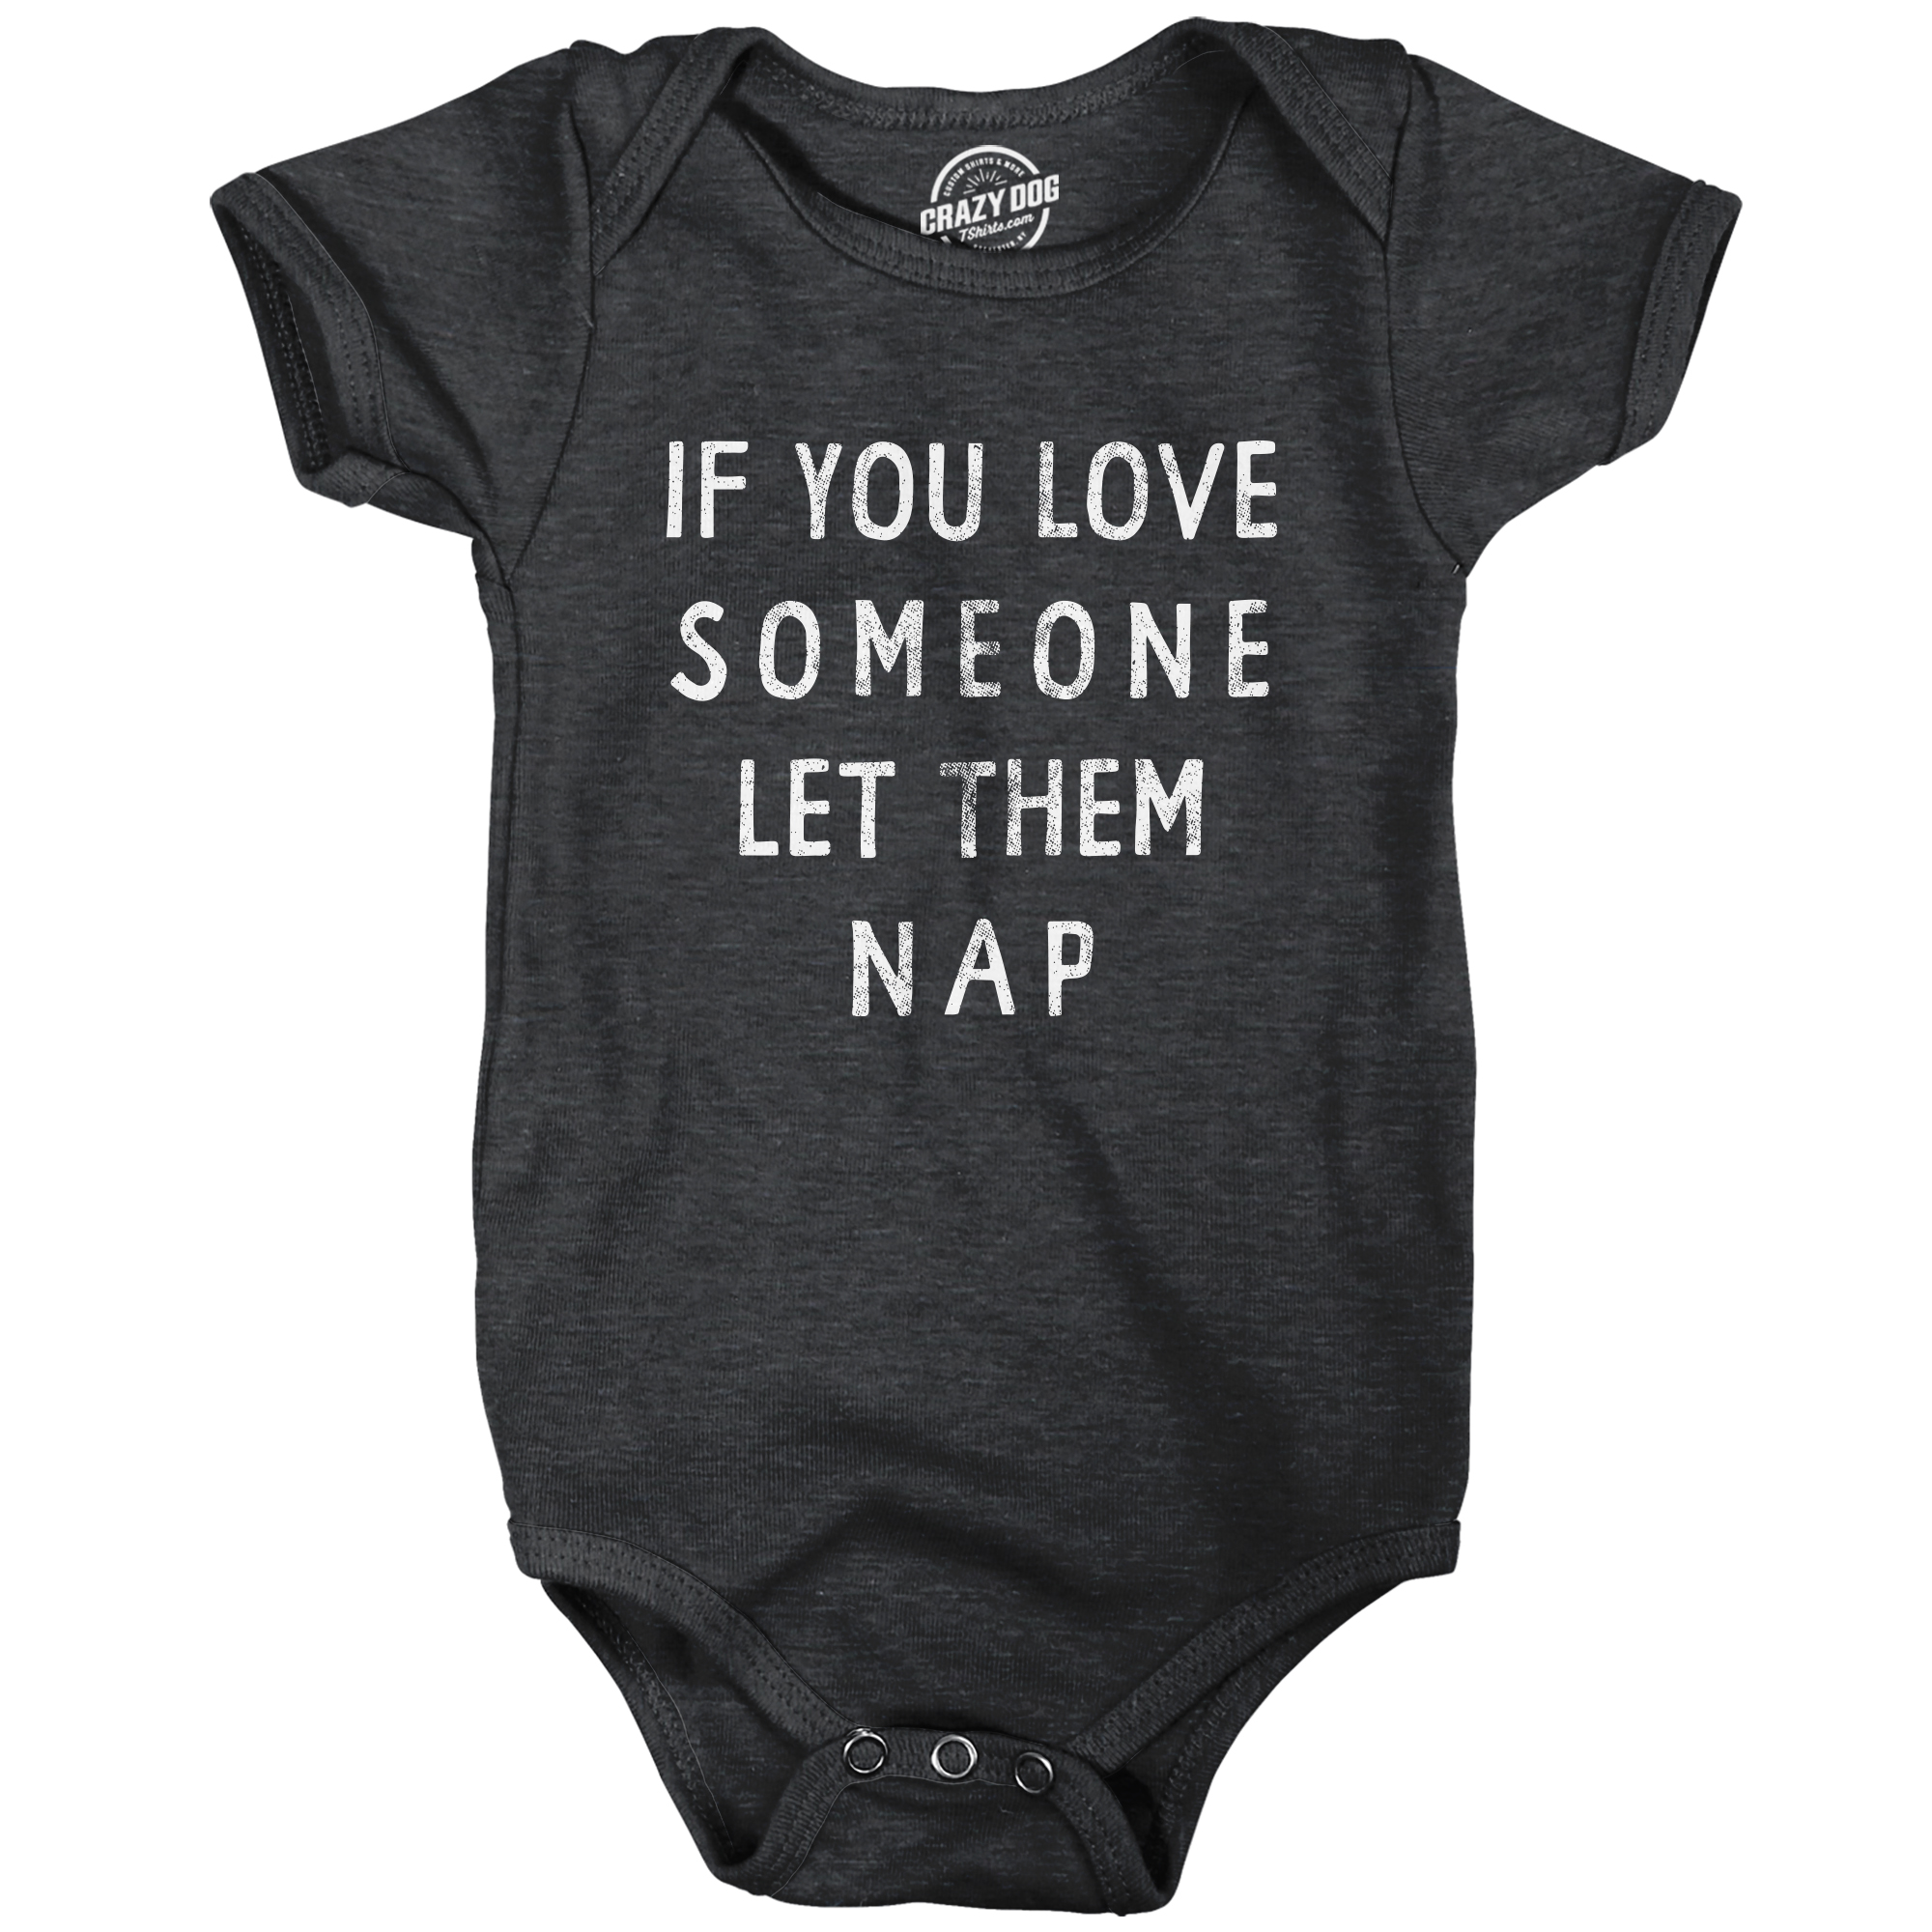 Crazy Dog Tshirts If You Love Someone Let Them Nap Baby Bodysuit Funny Sarcastic Text Jumper For Inphants